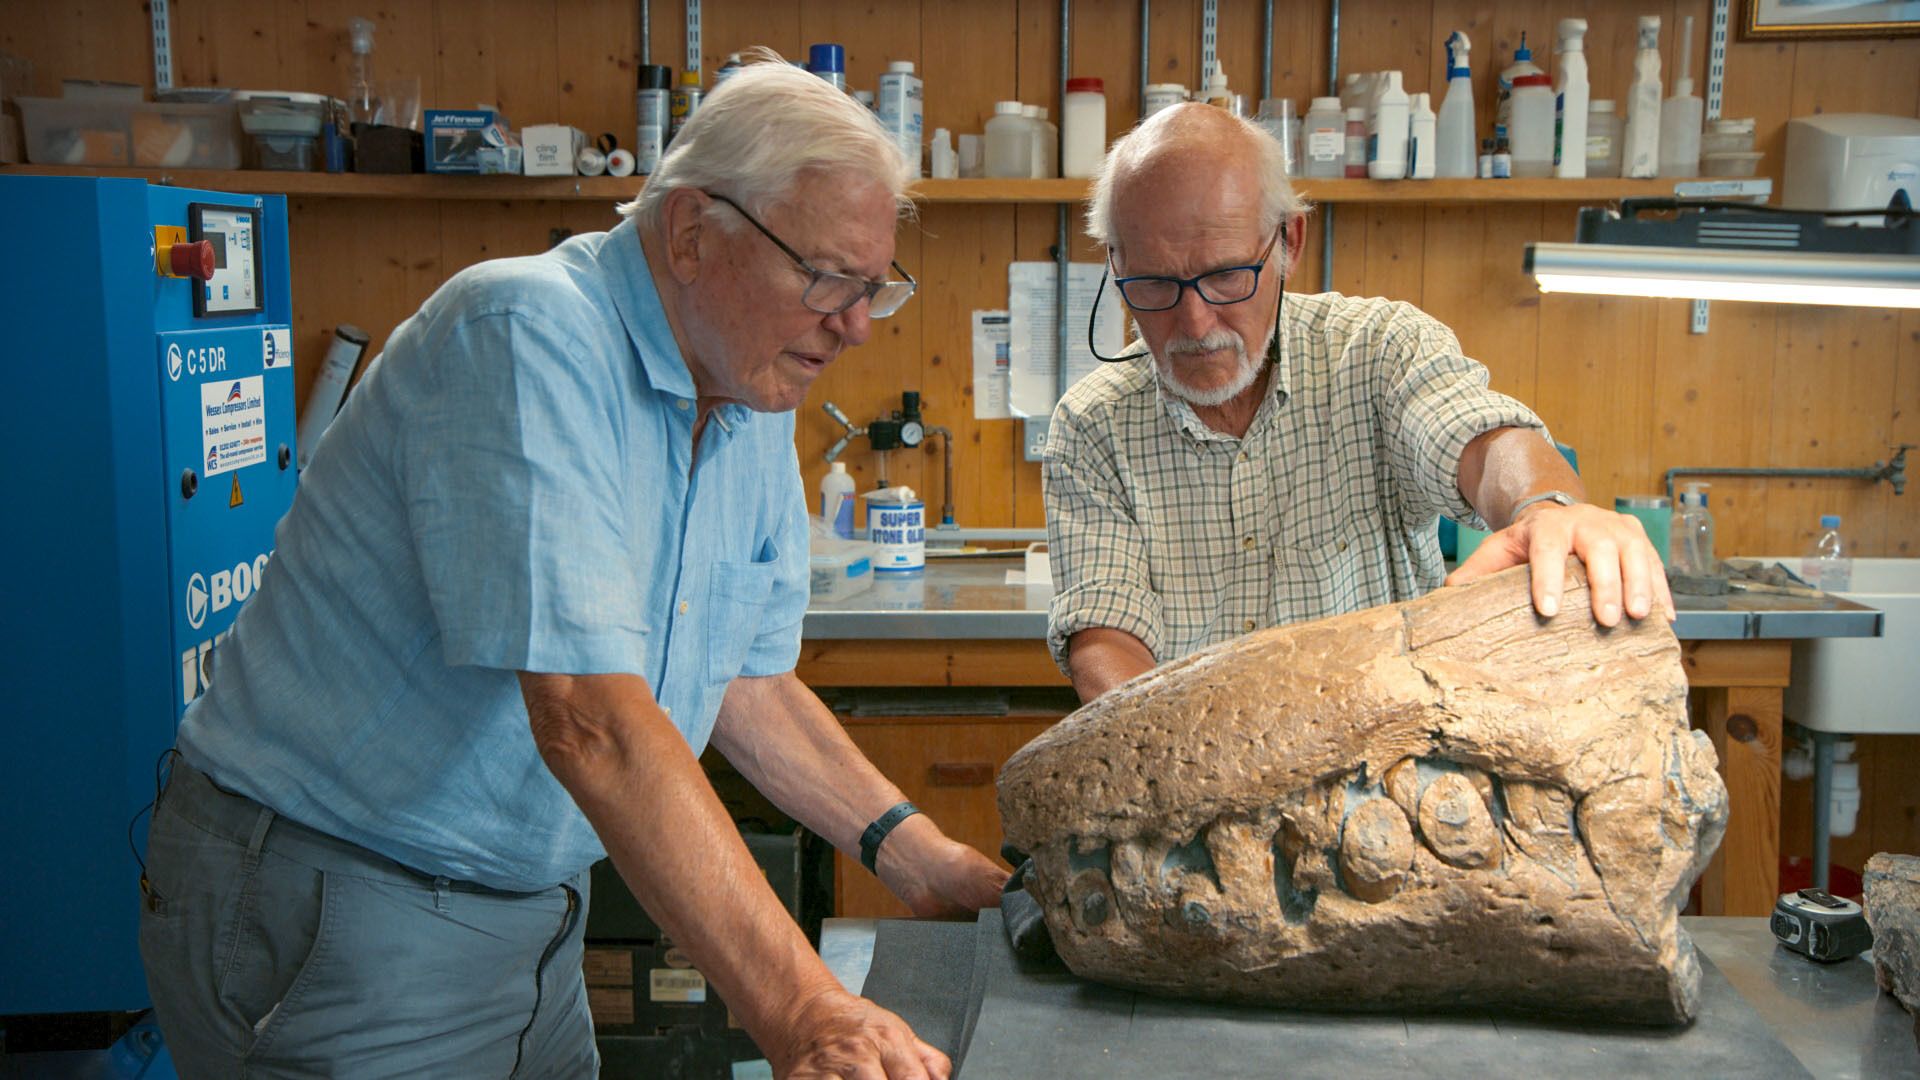 Sir David assesses the fossilised snout, which is around the size of a torso